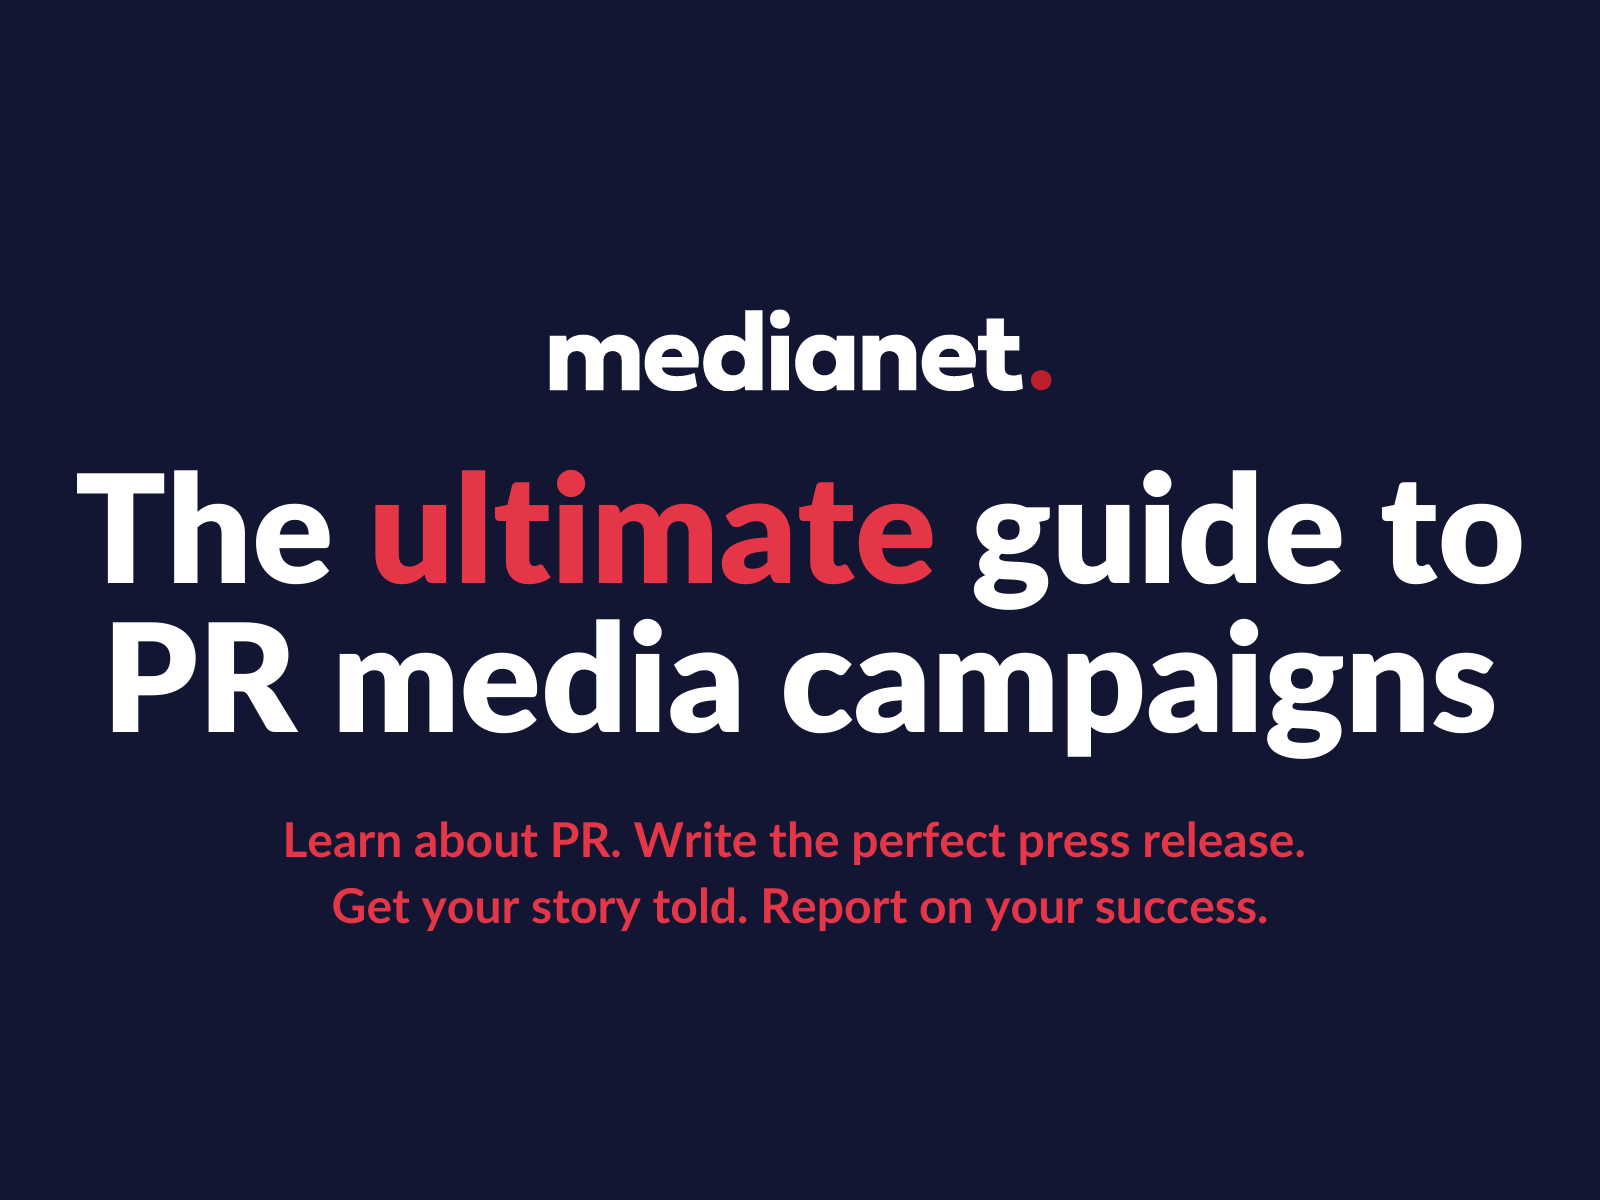 The ultimate guide to PR media campaigns